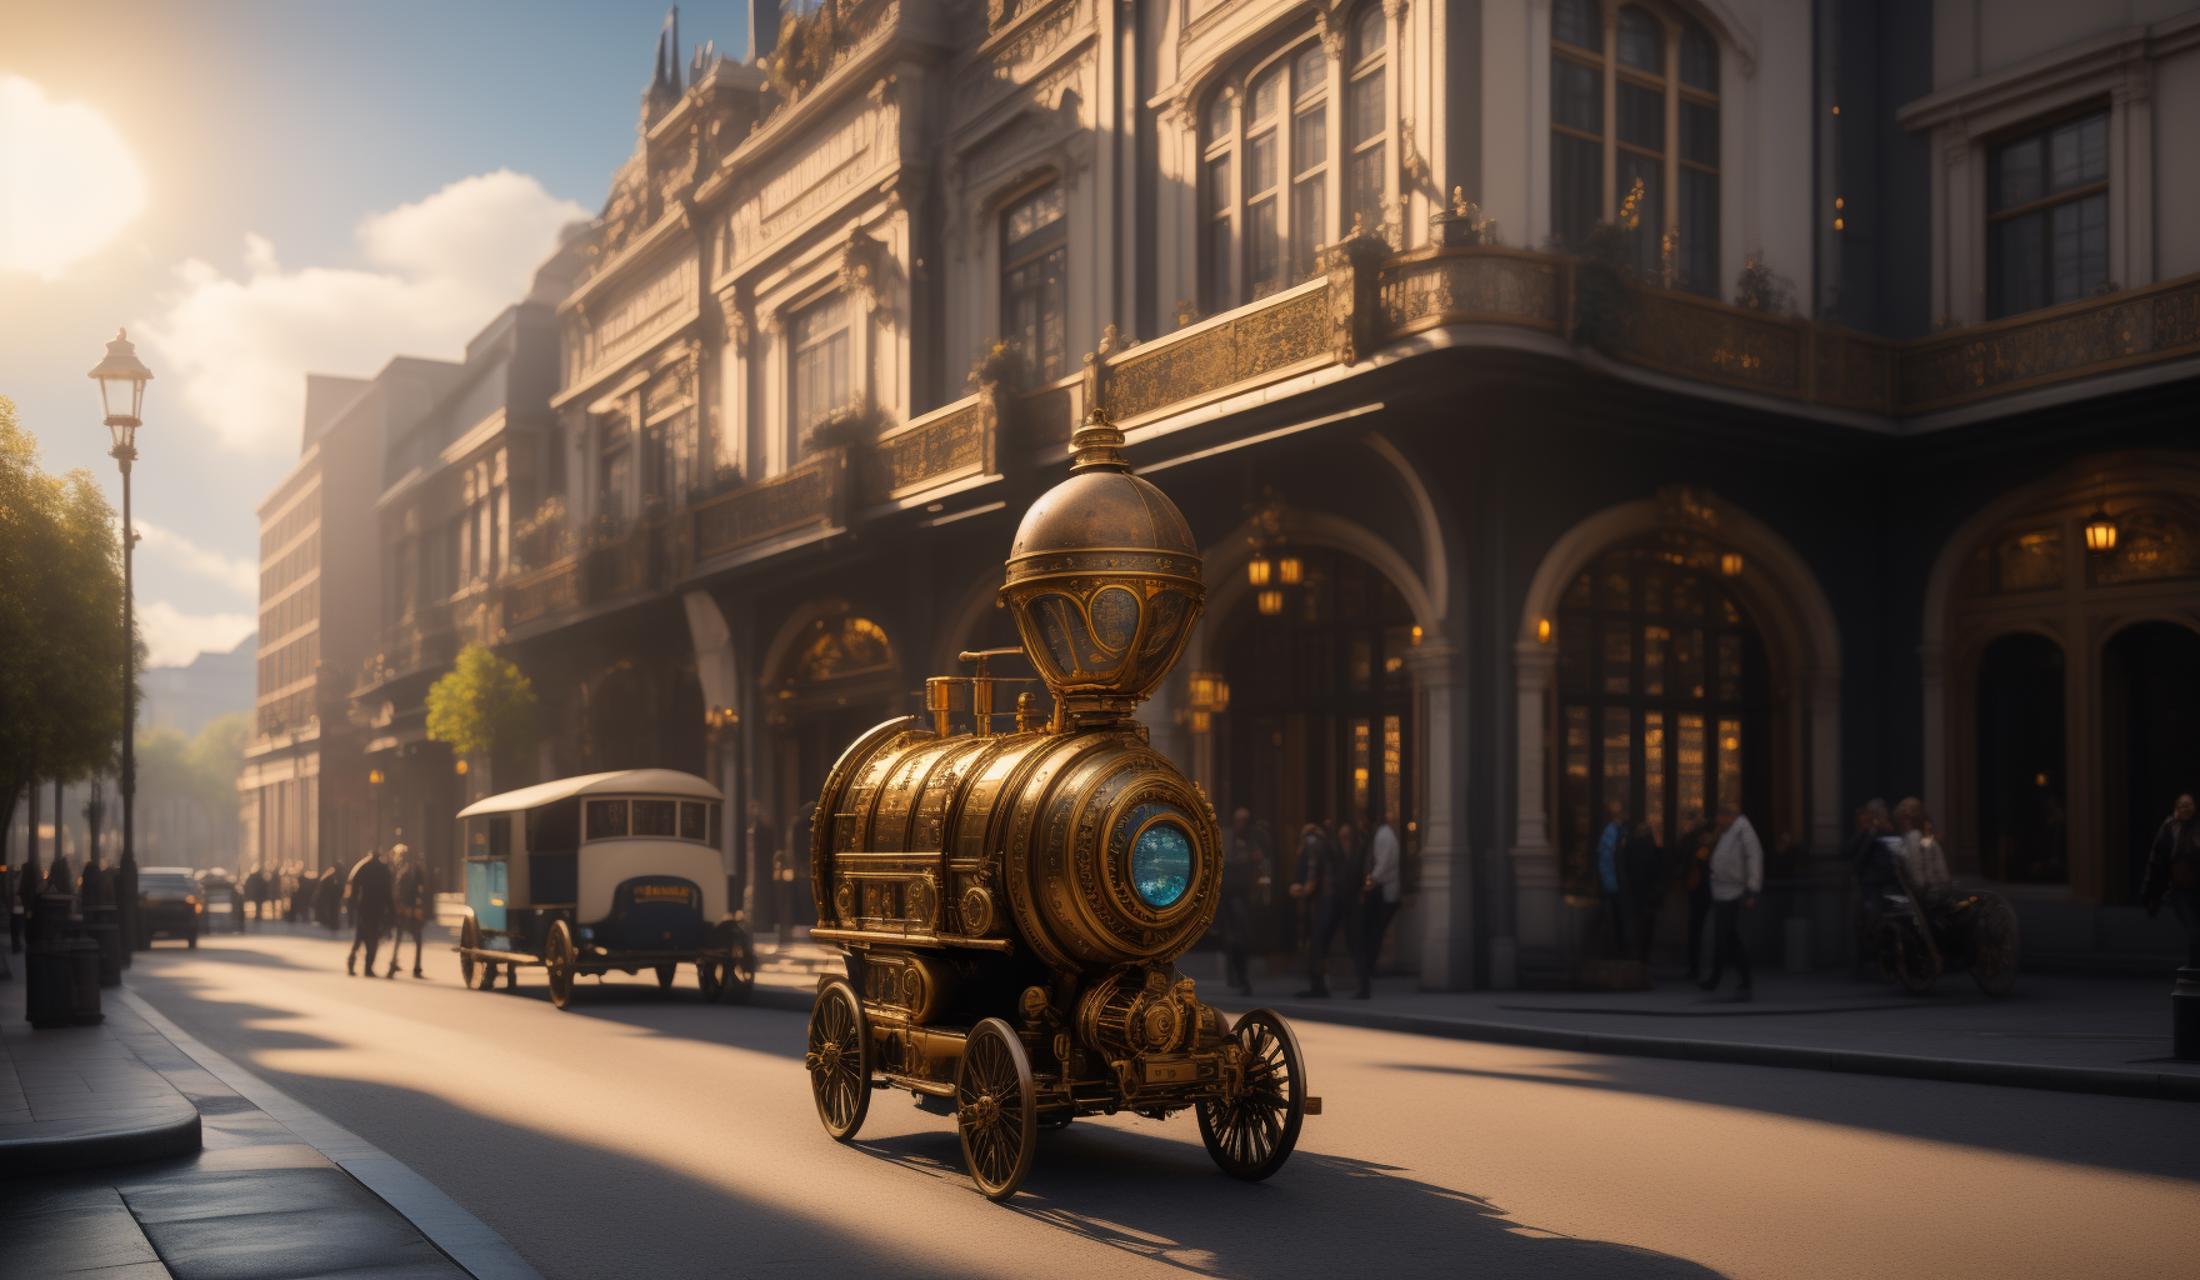 JJ's Building style - Steampunk image by jjhuang